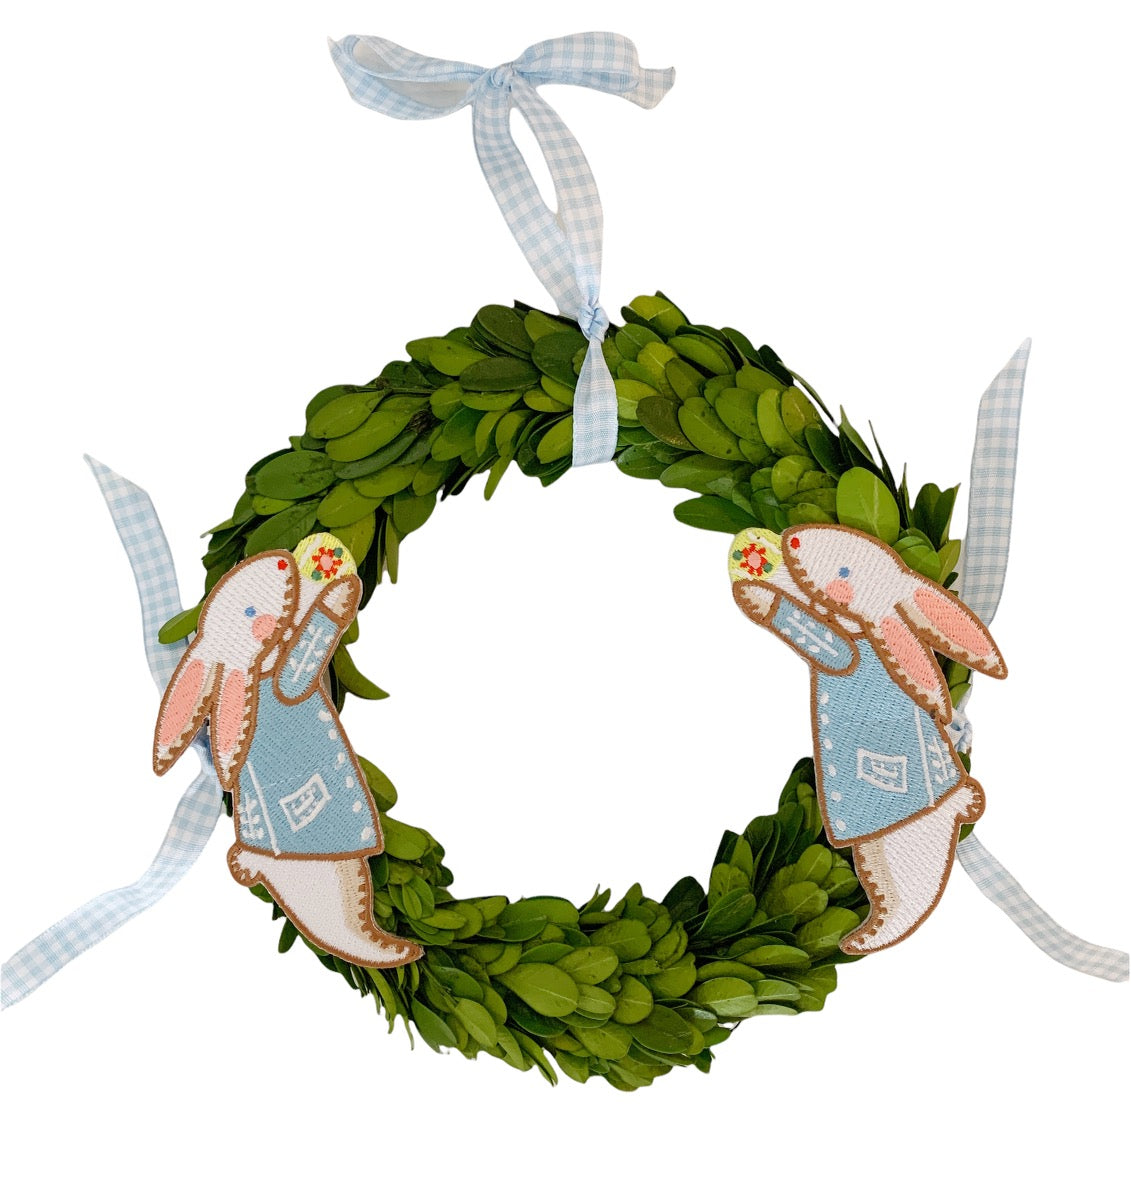 Embroidered Bunny Ornaments on Preserved Laurel Wreath